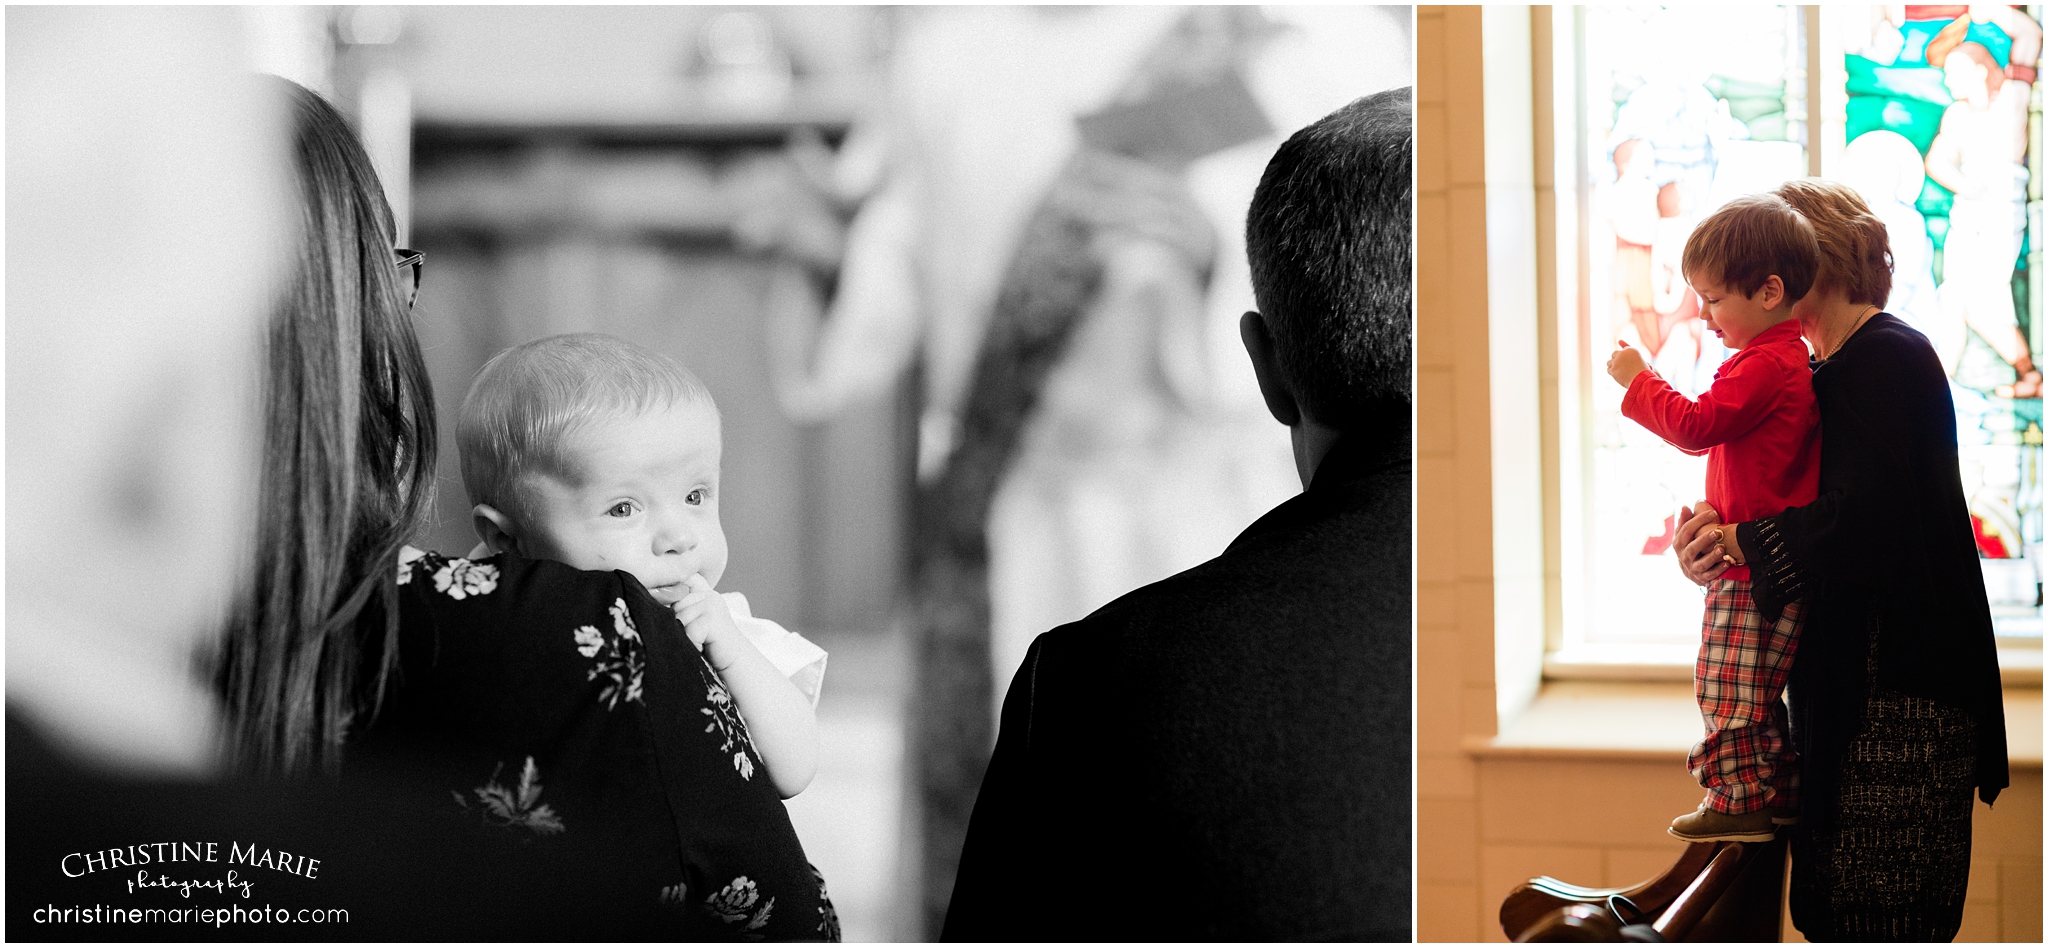 candid baptism photography, christine marie photography